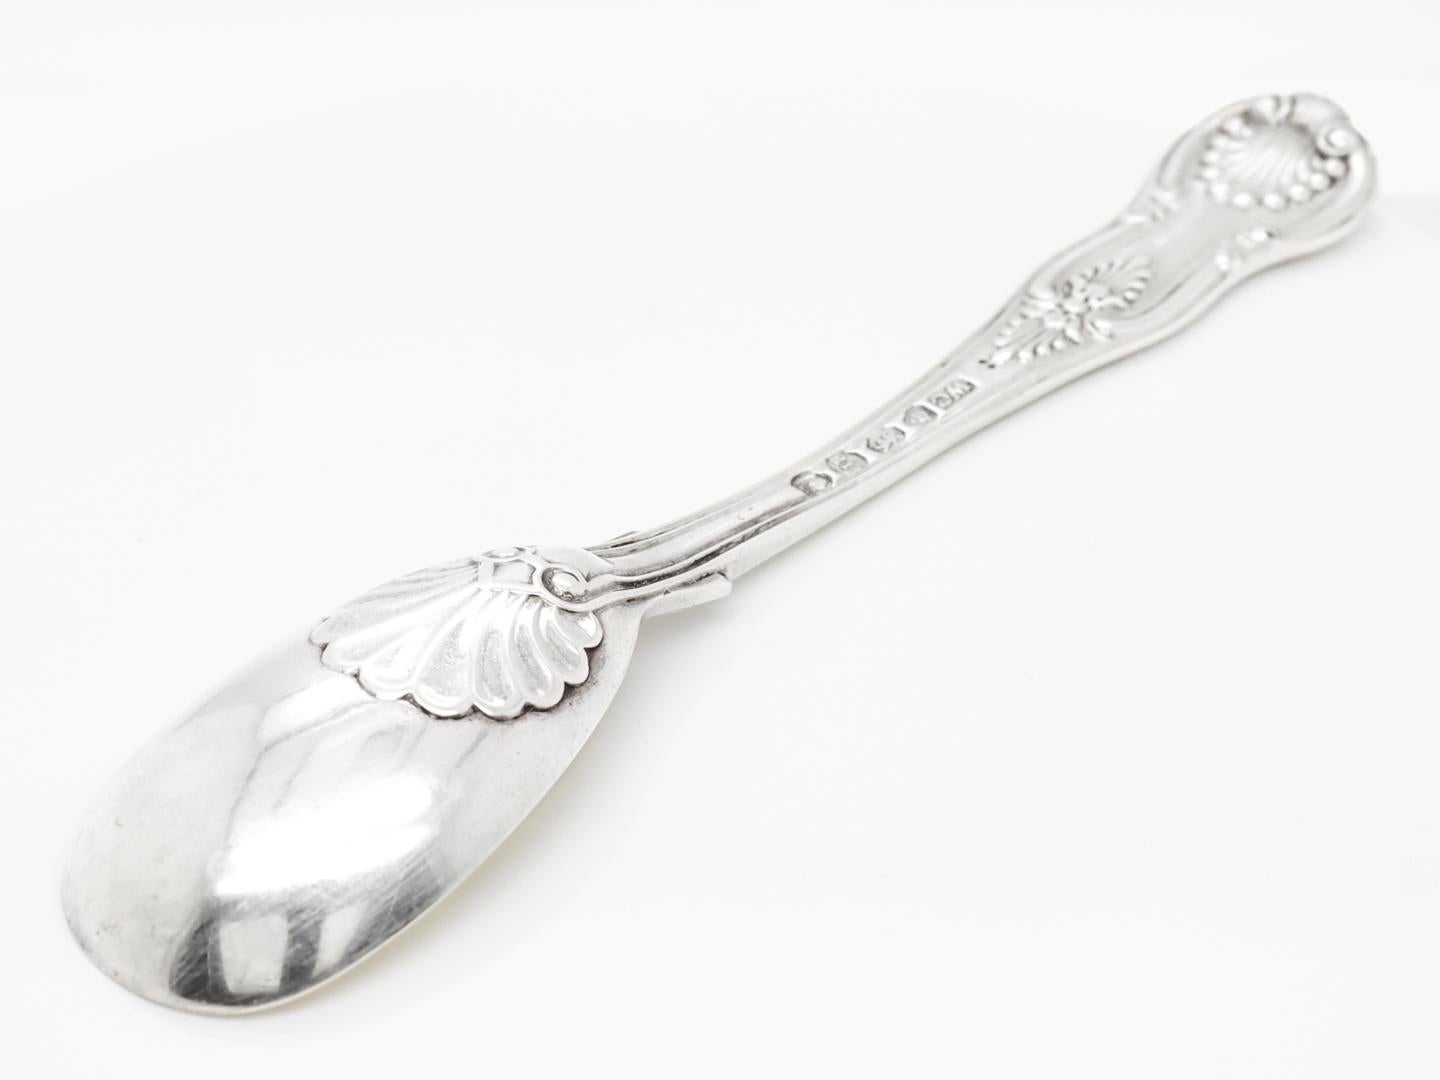 Antique English Sterling Silver Kings Mustard Spoon by William Chawner II In Good Condition For Sale In Philadelphia, PA